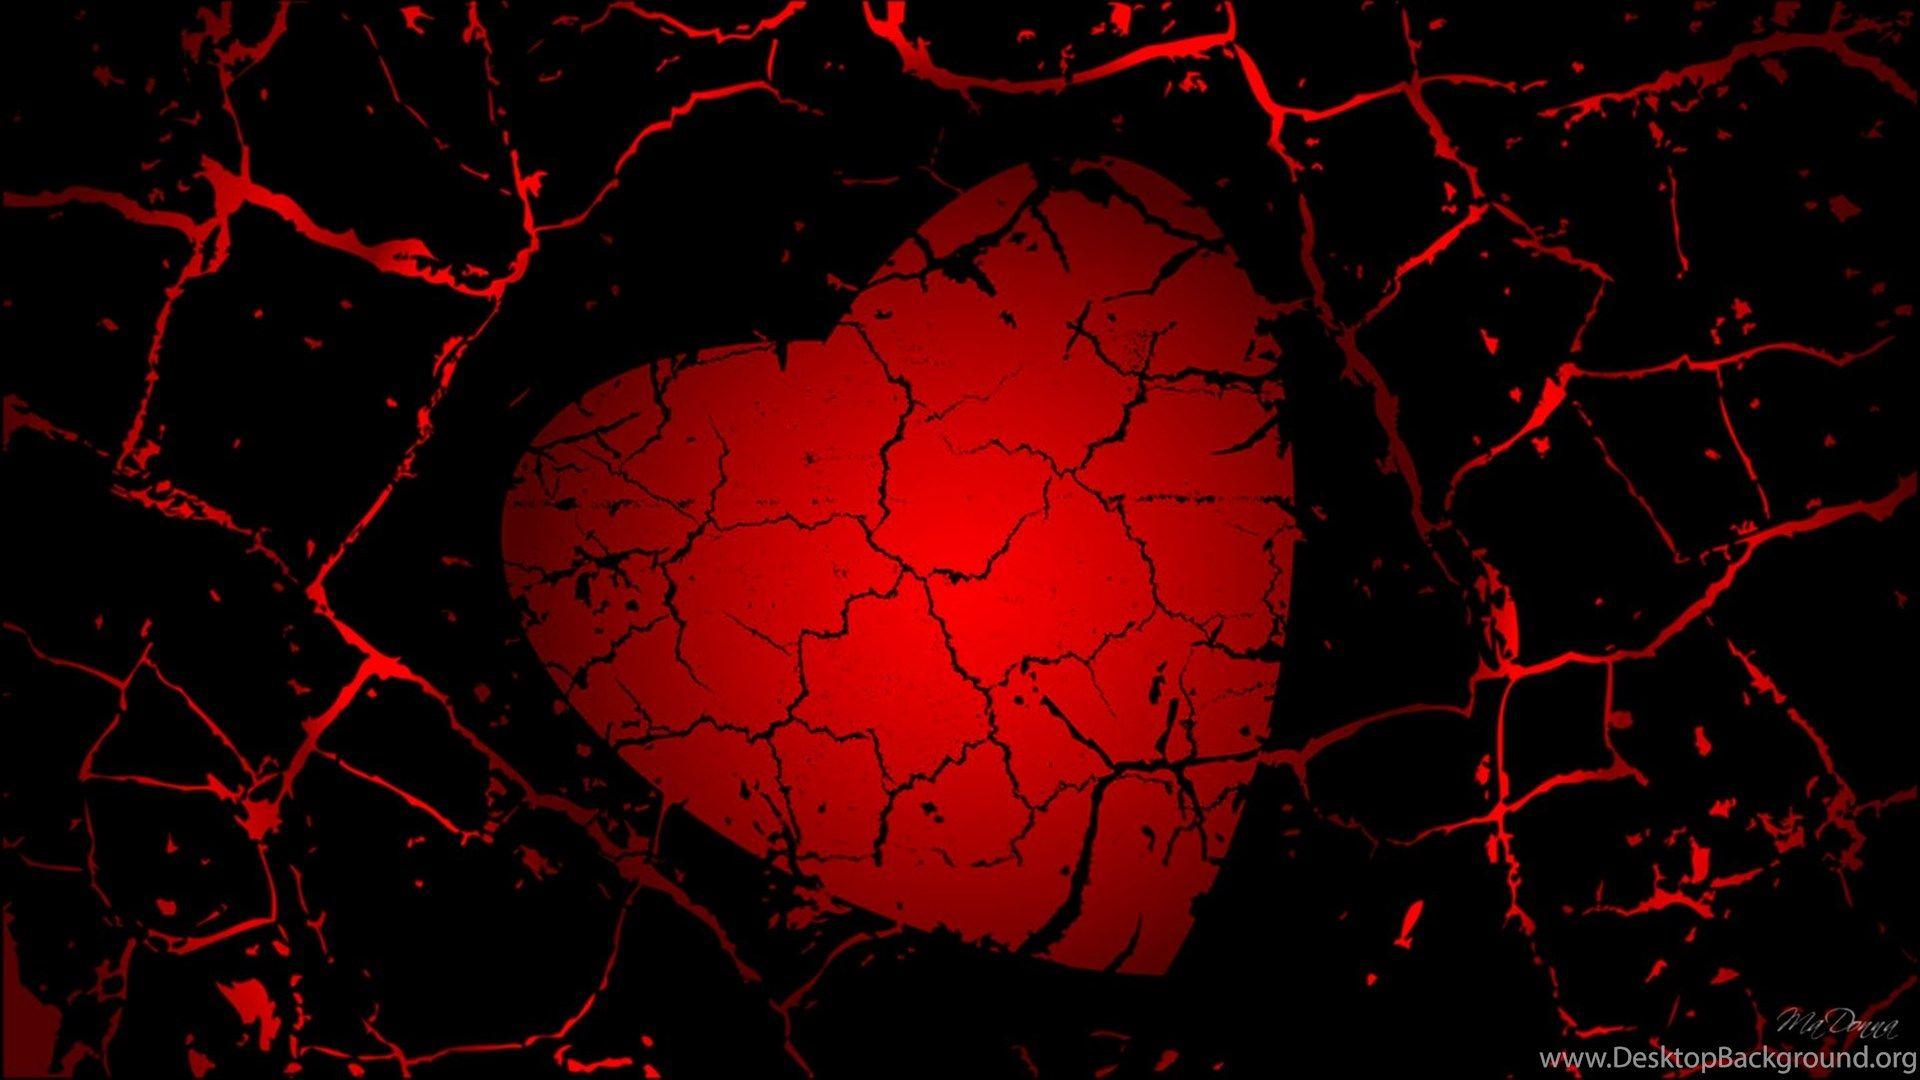 Red and Black Heart Wallpapers - Top Free Red and Black Heart